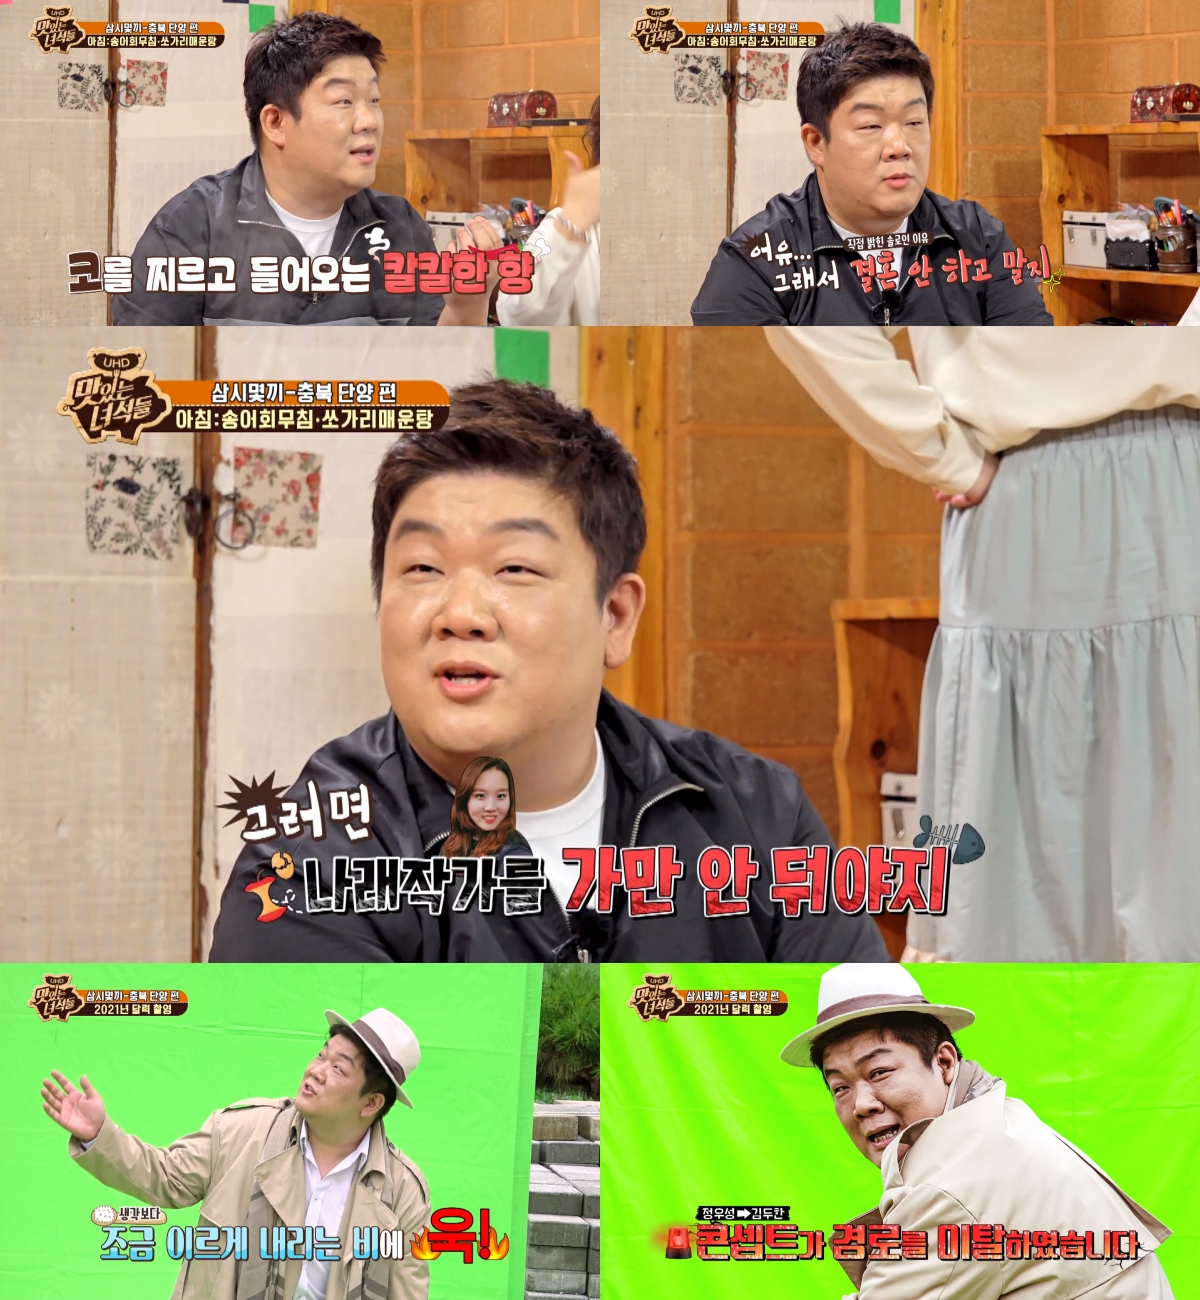 The comedian Yu Minsang declared war on the production teams pecking farming and gave Daeyu jam.In the comedy TV Delicious Guys - Three Sips Calendar Production Special broadcast on the 16th, Yu Minsang went to Danyang, Chungbuk with Kim Joon-hyun, Kim Min-kyung and Moon Se-yoon to enjoy local home food and take a photo shoot for Calendar production in 2021.Yu Minsang, who entered the mission of pecking into Calendars costume before breakfast, chose his birthday, October 9, saying, My birthday should be full of Mukbang, and my name is a slander of the production team.If so, I will not let the writer go, he said, but he won the prize in a bite and gave a laugh.Yu Minsang, who looked at Mukbang, said to his younger brothers who were worried about overeating ahead of Calendar shooting, Is not it to eat to manage their body?Also, referring to the entertainers who manage the body before shooting the picture, I saw a lot of body care because of marriage.So I do not marriage and laughed a big smile.Yu Minsang, who was filming Calendar after the meal, called the concept of Jung Woo-sung, which is 2% short of Falling leaves due to the soaking and cold wind in autumn rain.Yu Minsang, who is dressed in trench coats and heavy hats, reminded Kim Doo-han of Yain Age rather than Jung Woo-sung, but It is similar without a hat.I was surprised by the unending confidence of Jongno Jung Woo-sung Yu Minsang, who started shooting in earnest, said, I am enjoying it as an easy shot that only falls leaves are appropriate.However, thanks to Kim Joon-hyun and Kim Min-kyung, who throw out the Falling Leaves bombs, he shot a picture of the hardship that could not open his eyes properly.As such, Yu Minsang fell into a penalty in the production teams agriculture, presented Daeyu jam, and showed off the entertainment sense of the popular comedian with a fantastic gesture.In addition, despite the interruption of his younger brothers, he showed off his professional spirit of completing the Calendar photo shoot and filled the A house theater with delicious laughter on Friday night.Yu Minsangs performance can be seen on comedy TV Delicious Guys, which is broadcast every Friday at 8 pm.